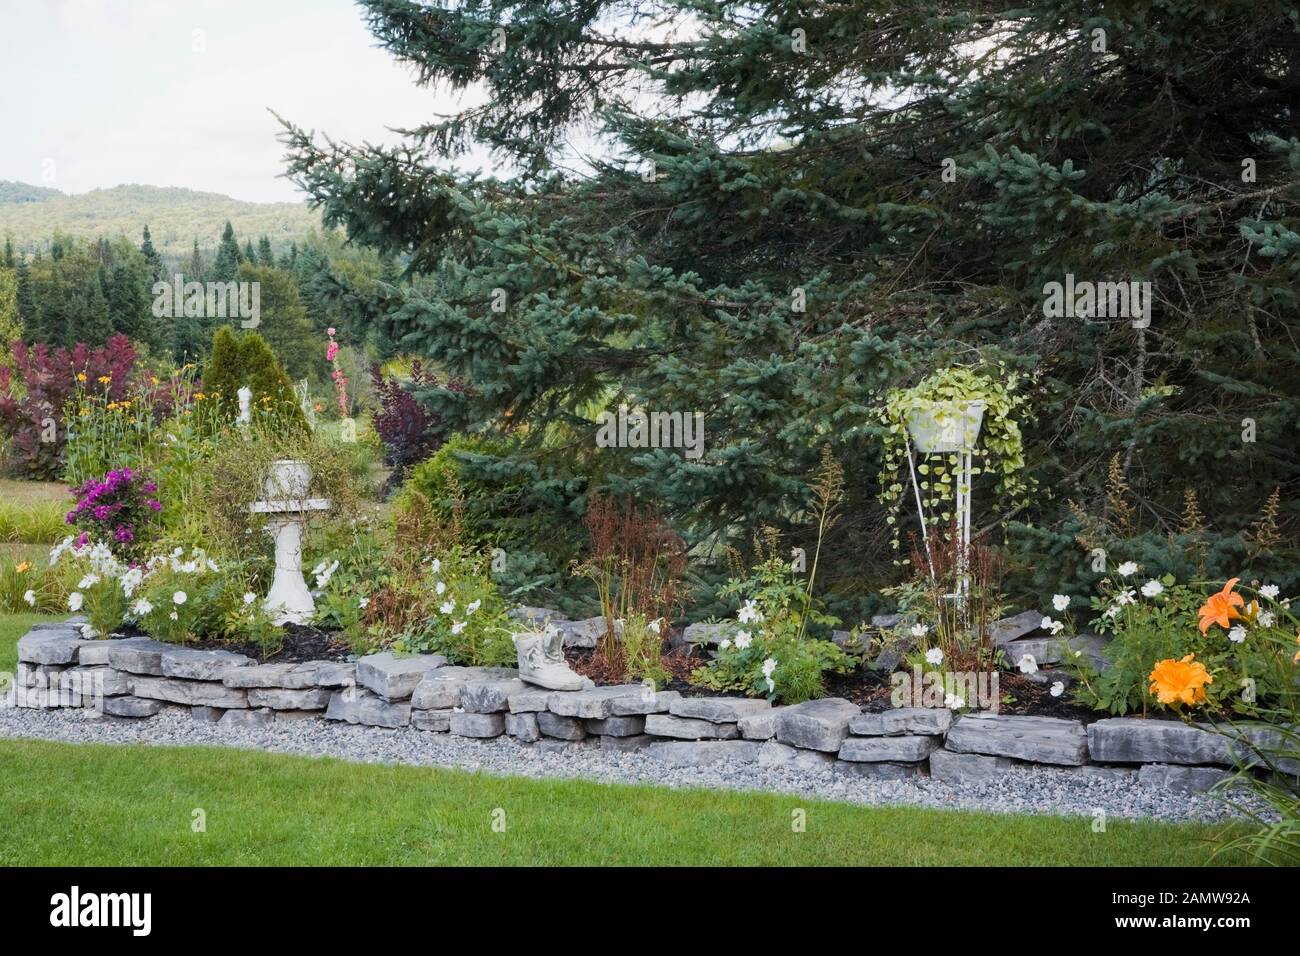 Orange Hemerocallis - Daylilies and raised grey stone border planted with white perennial flowers, Picea - Spruce tree and planters in backyard garden Stock Photo